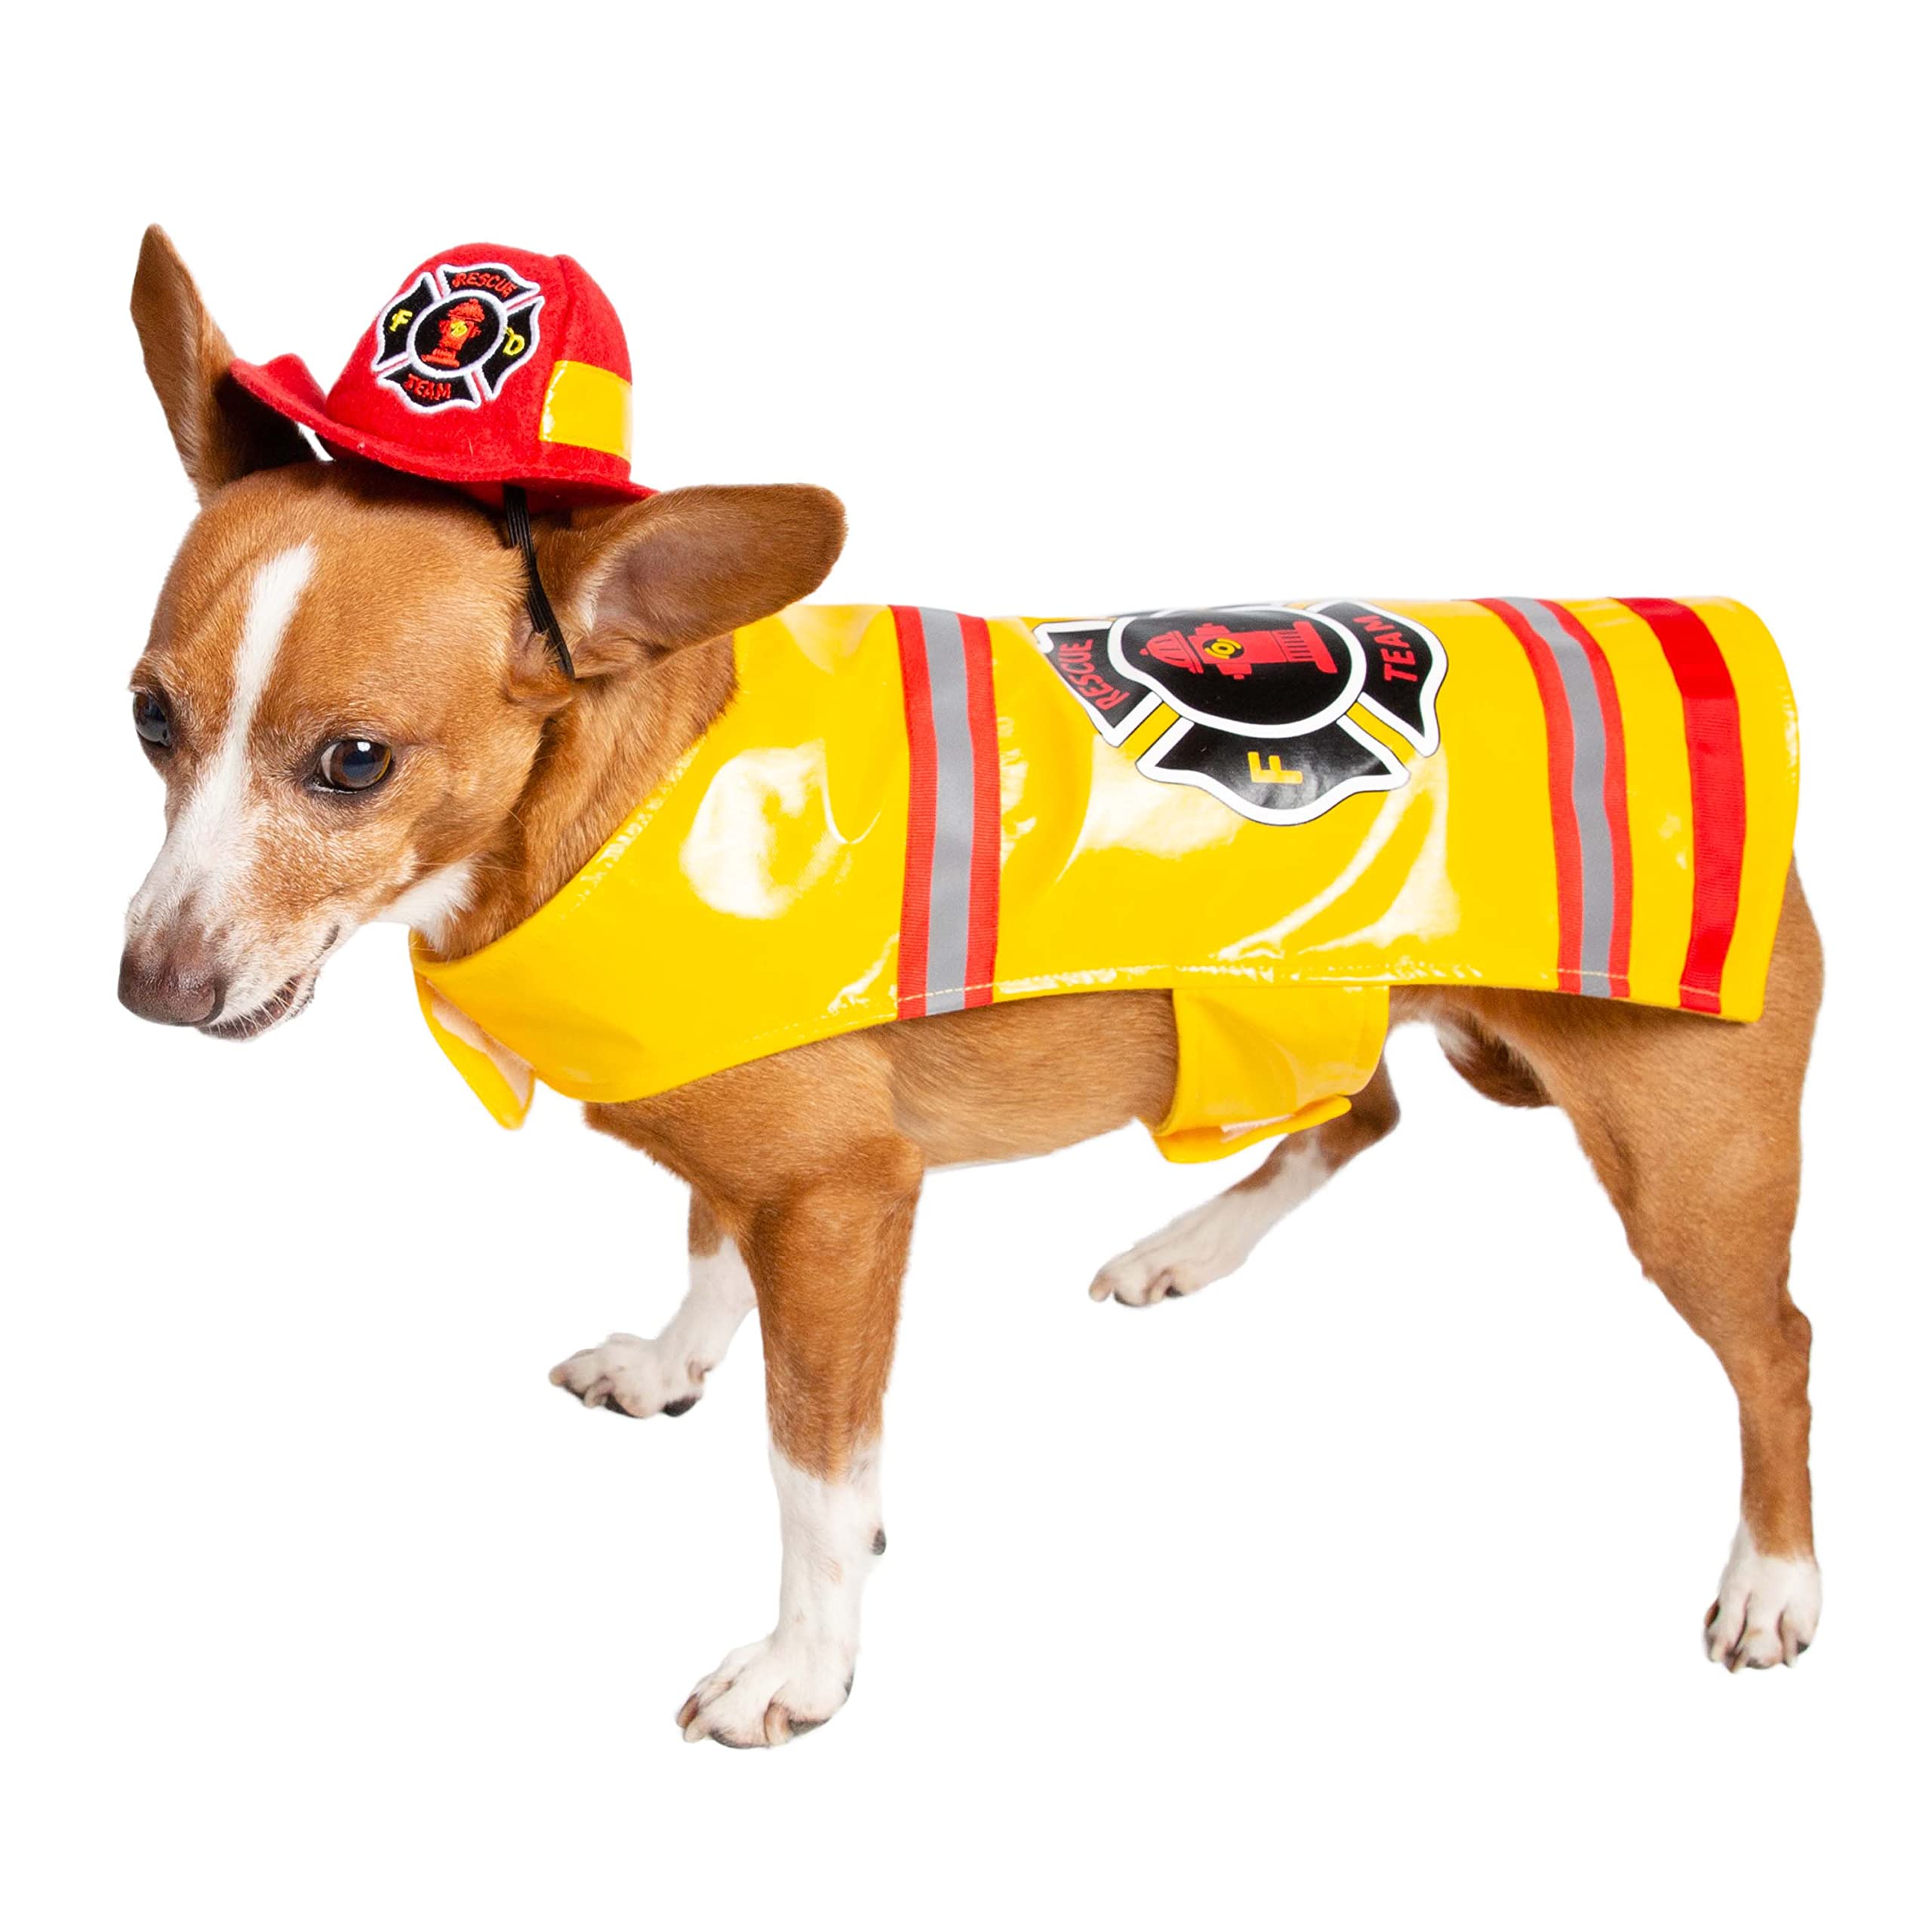 Pet Krewe Dog Firefighter Costume - Funny Halloween Pet Fireman Outfit Costumes for Small, Medium, Large Cats and Dogs.  - Like New